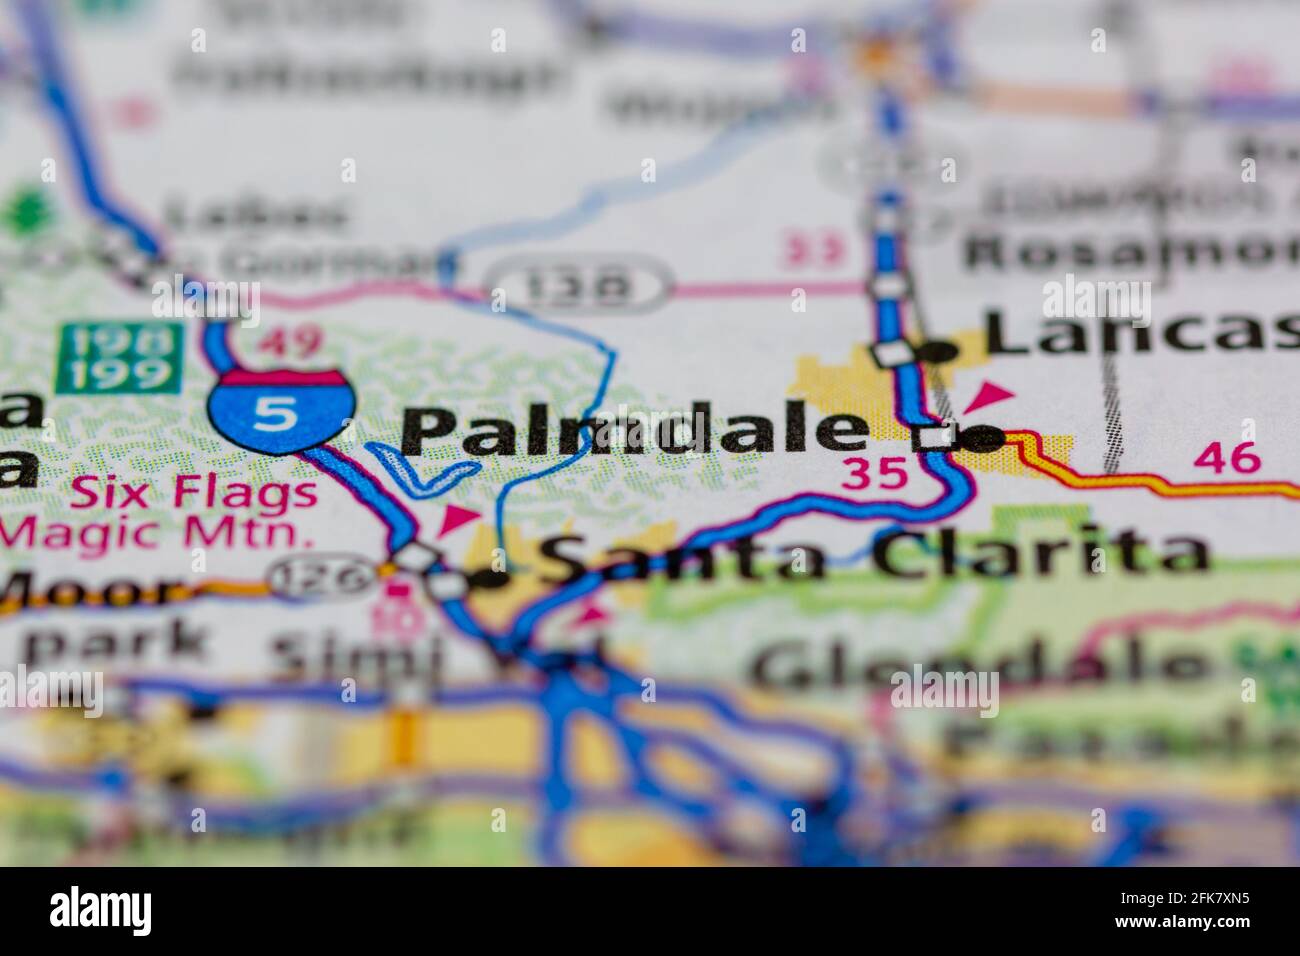 Palmdale California USA shown on a Geography map or road map Stock Photo